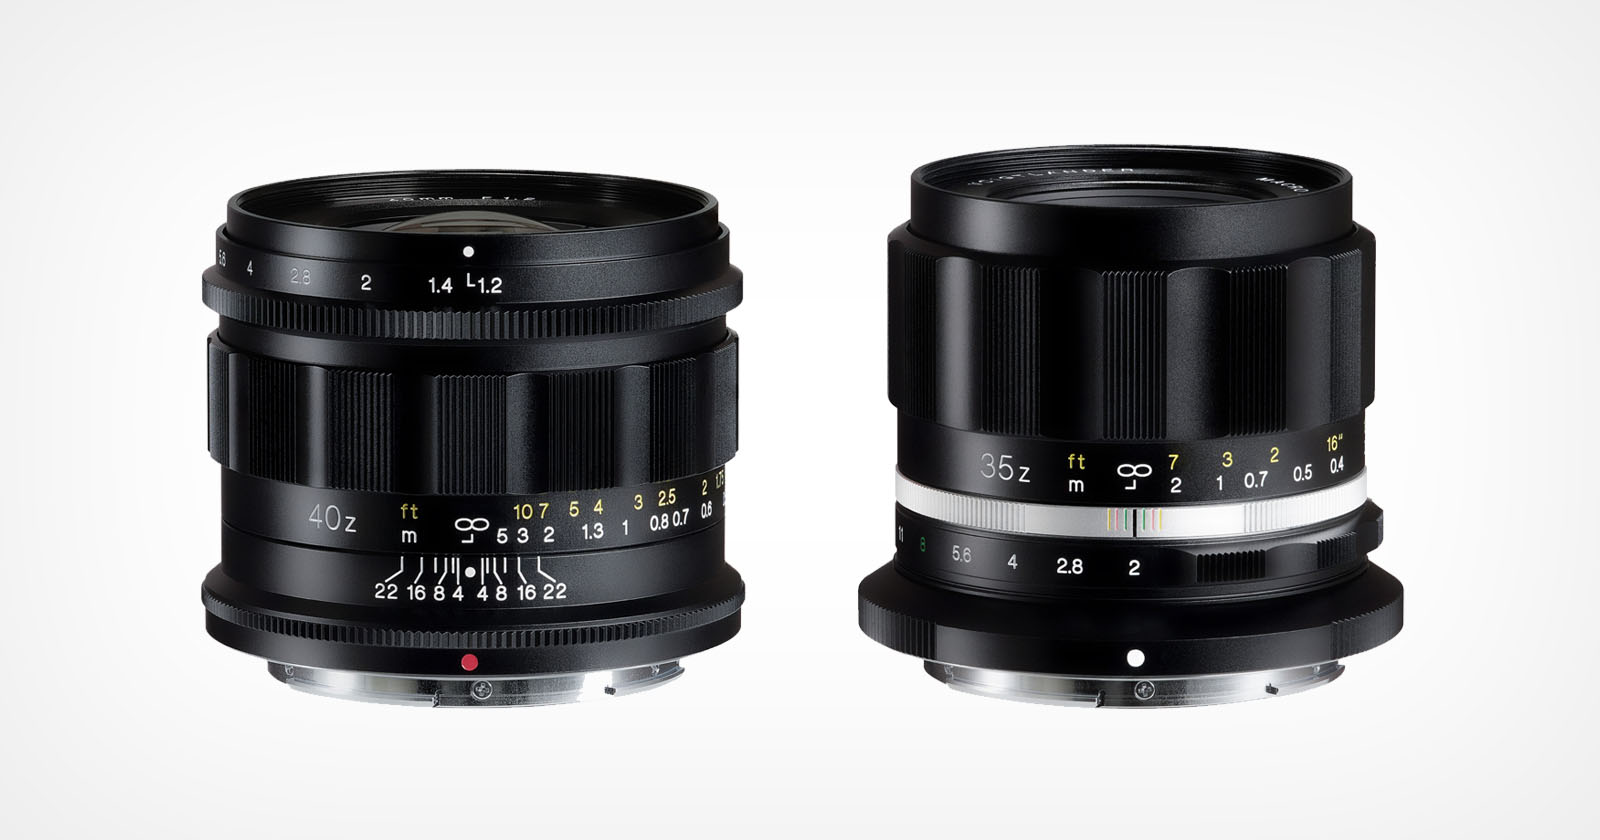 Cosina Adds Two Voigtlander Z-Mount Primes: 40mm f/1.2 and 35mm f/2